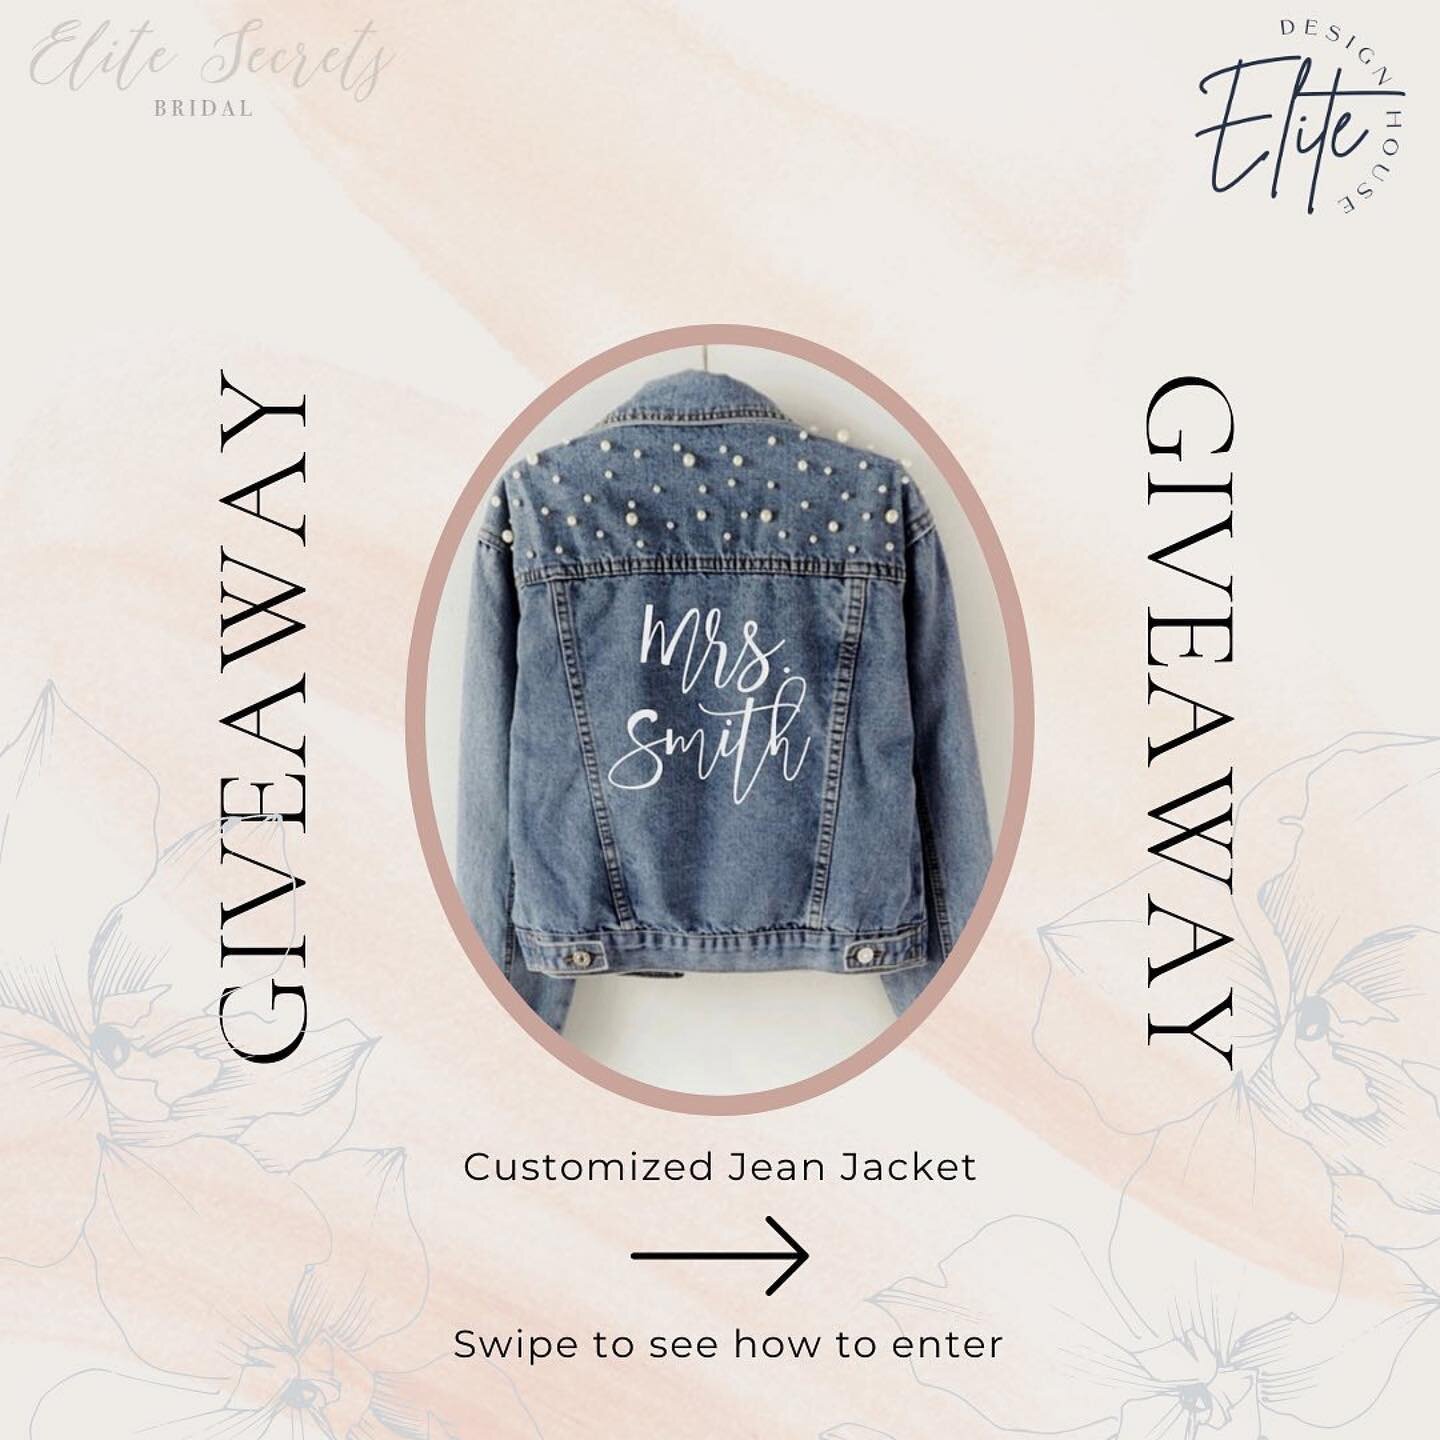 🚨GIVEAWAY!🚨Two lucky winners will win a personalized Bridal Denim Jacket, complimentary of Elite Design House! ✨

All you have to do is:
⭐️ Follow @elitesecretsbridal &amp; @elitedesignhouseofmd 
⭐️ Join our IG Live Designer Chat w/ @zsaneofficial 